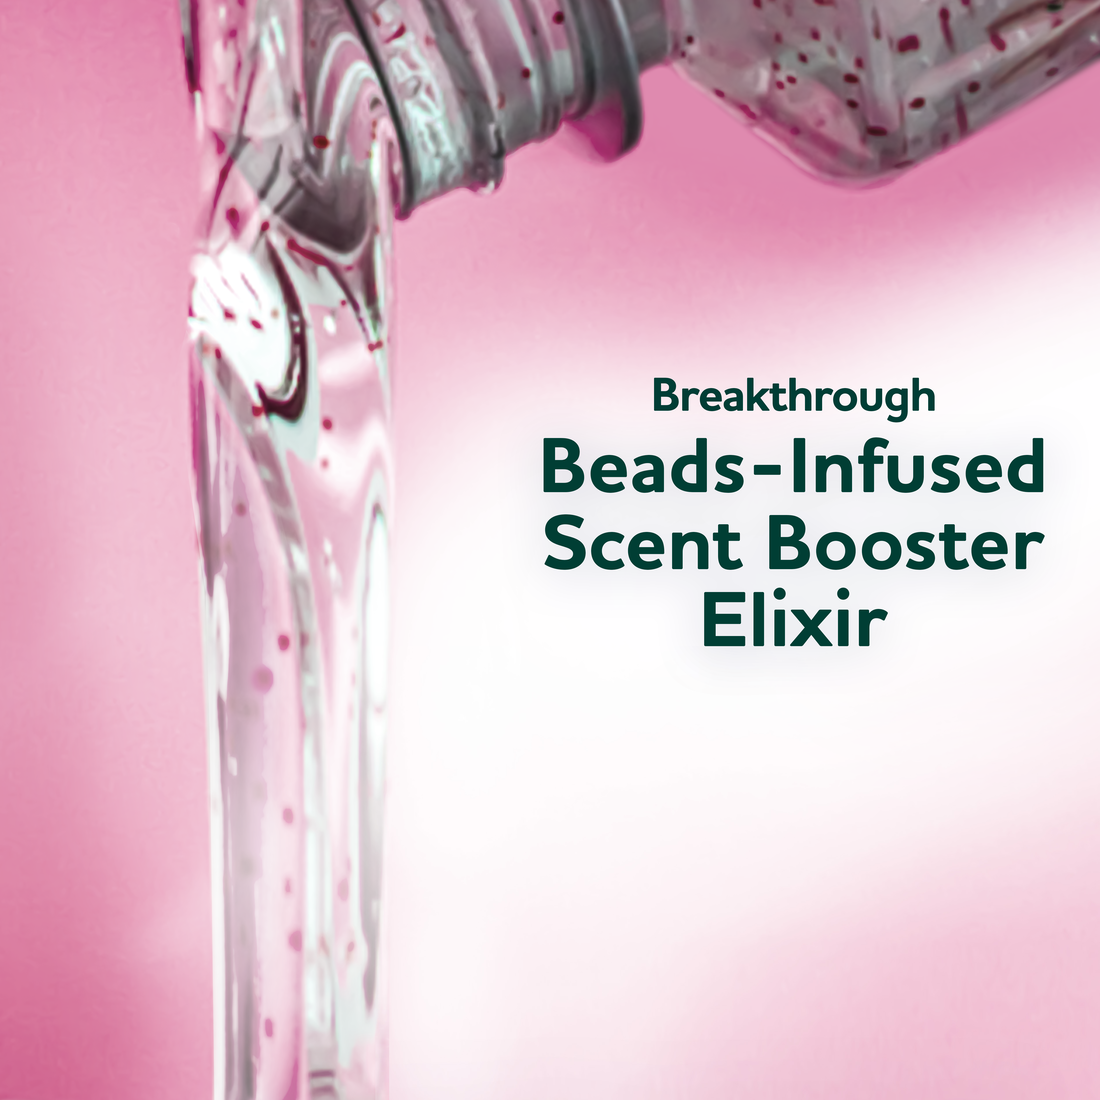 Breakthrough Beads-Infused Scent Booster Elixir